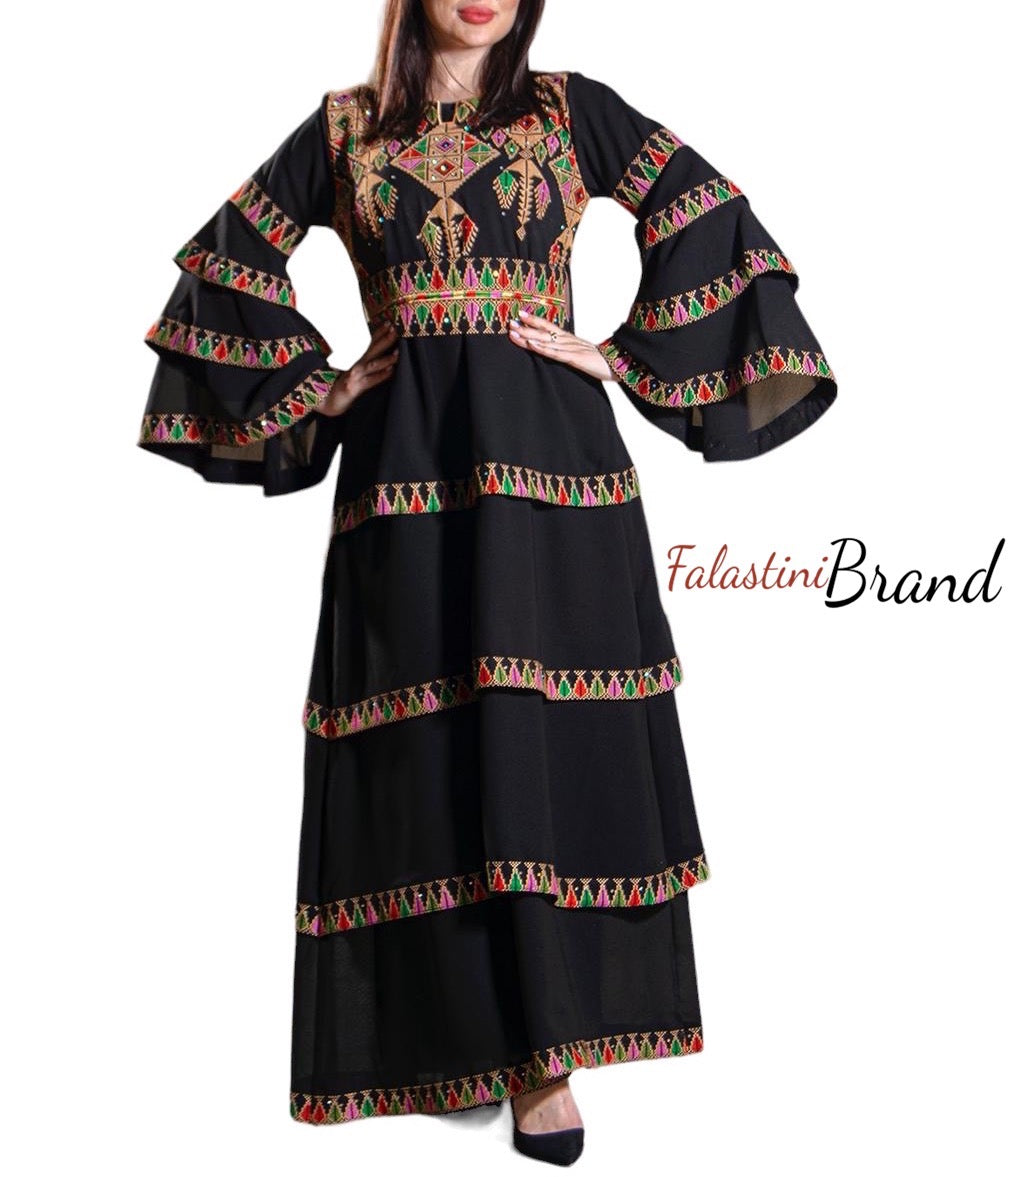 Stunning Black and Golden Ruffles Embroidered Dress